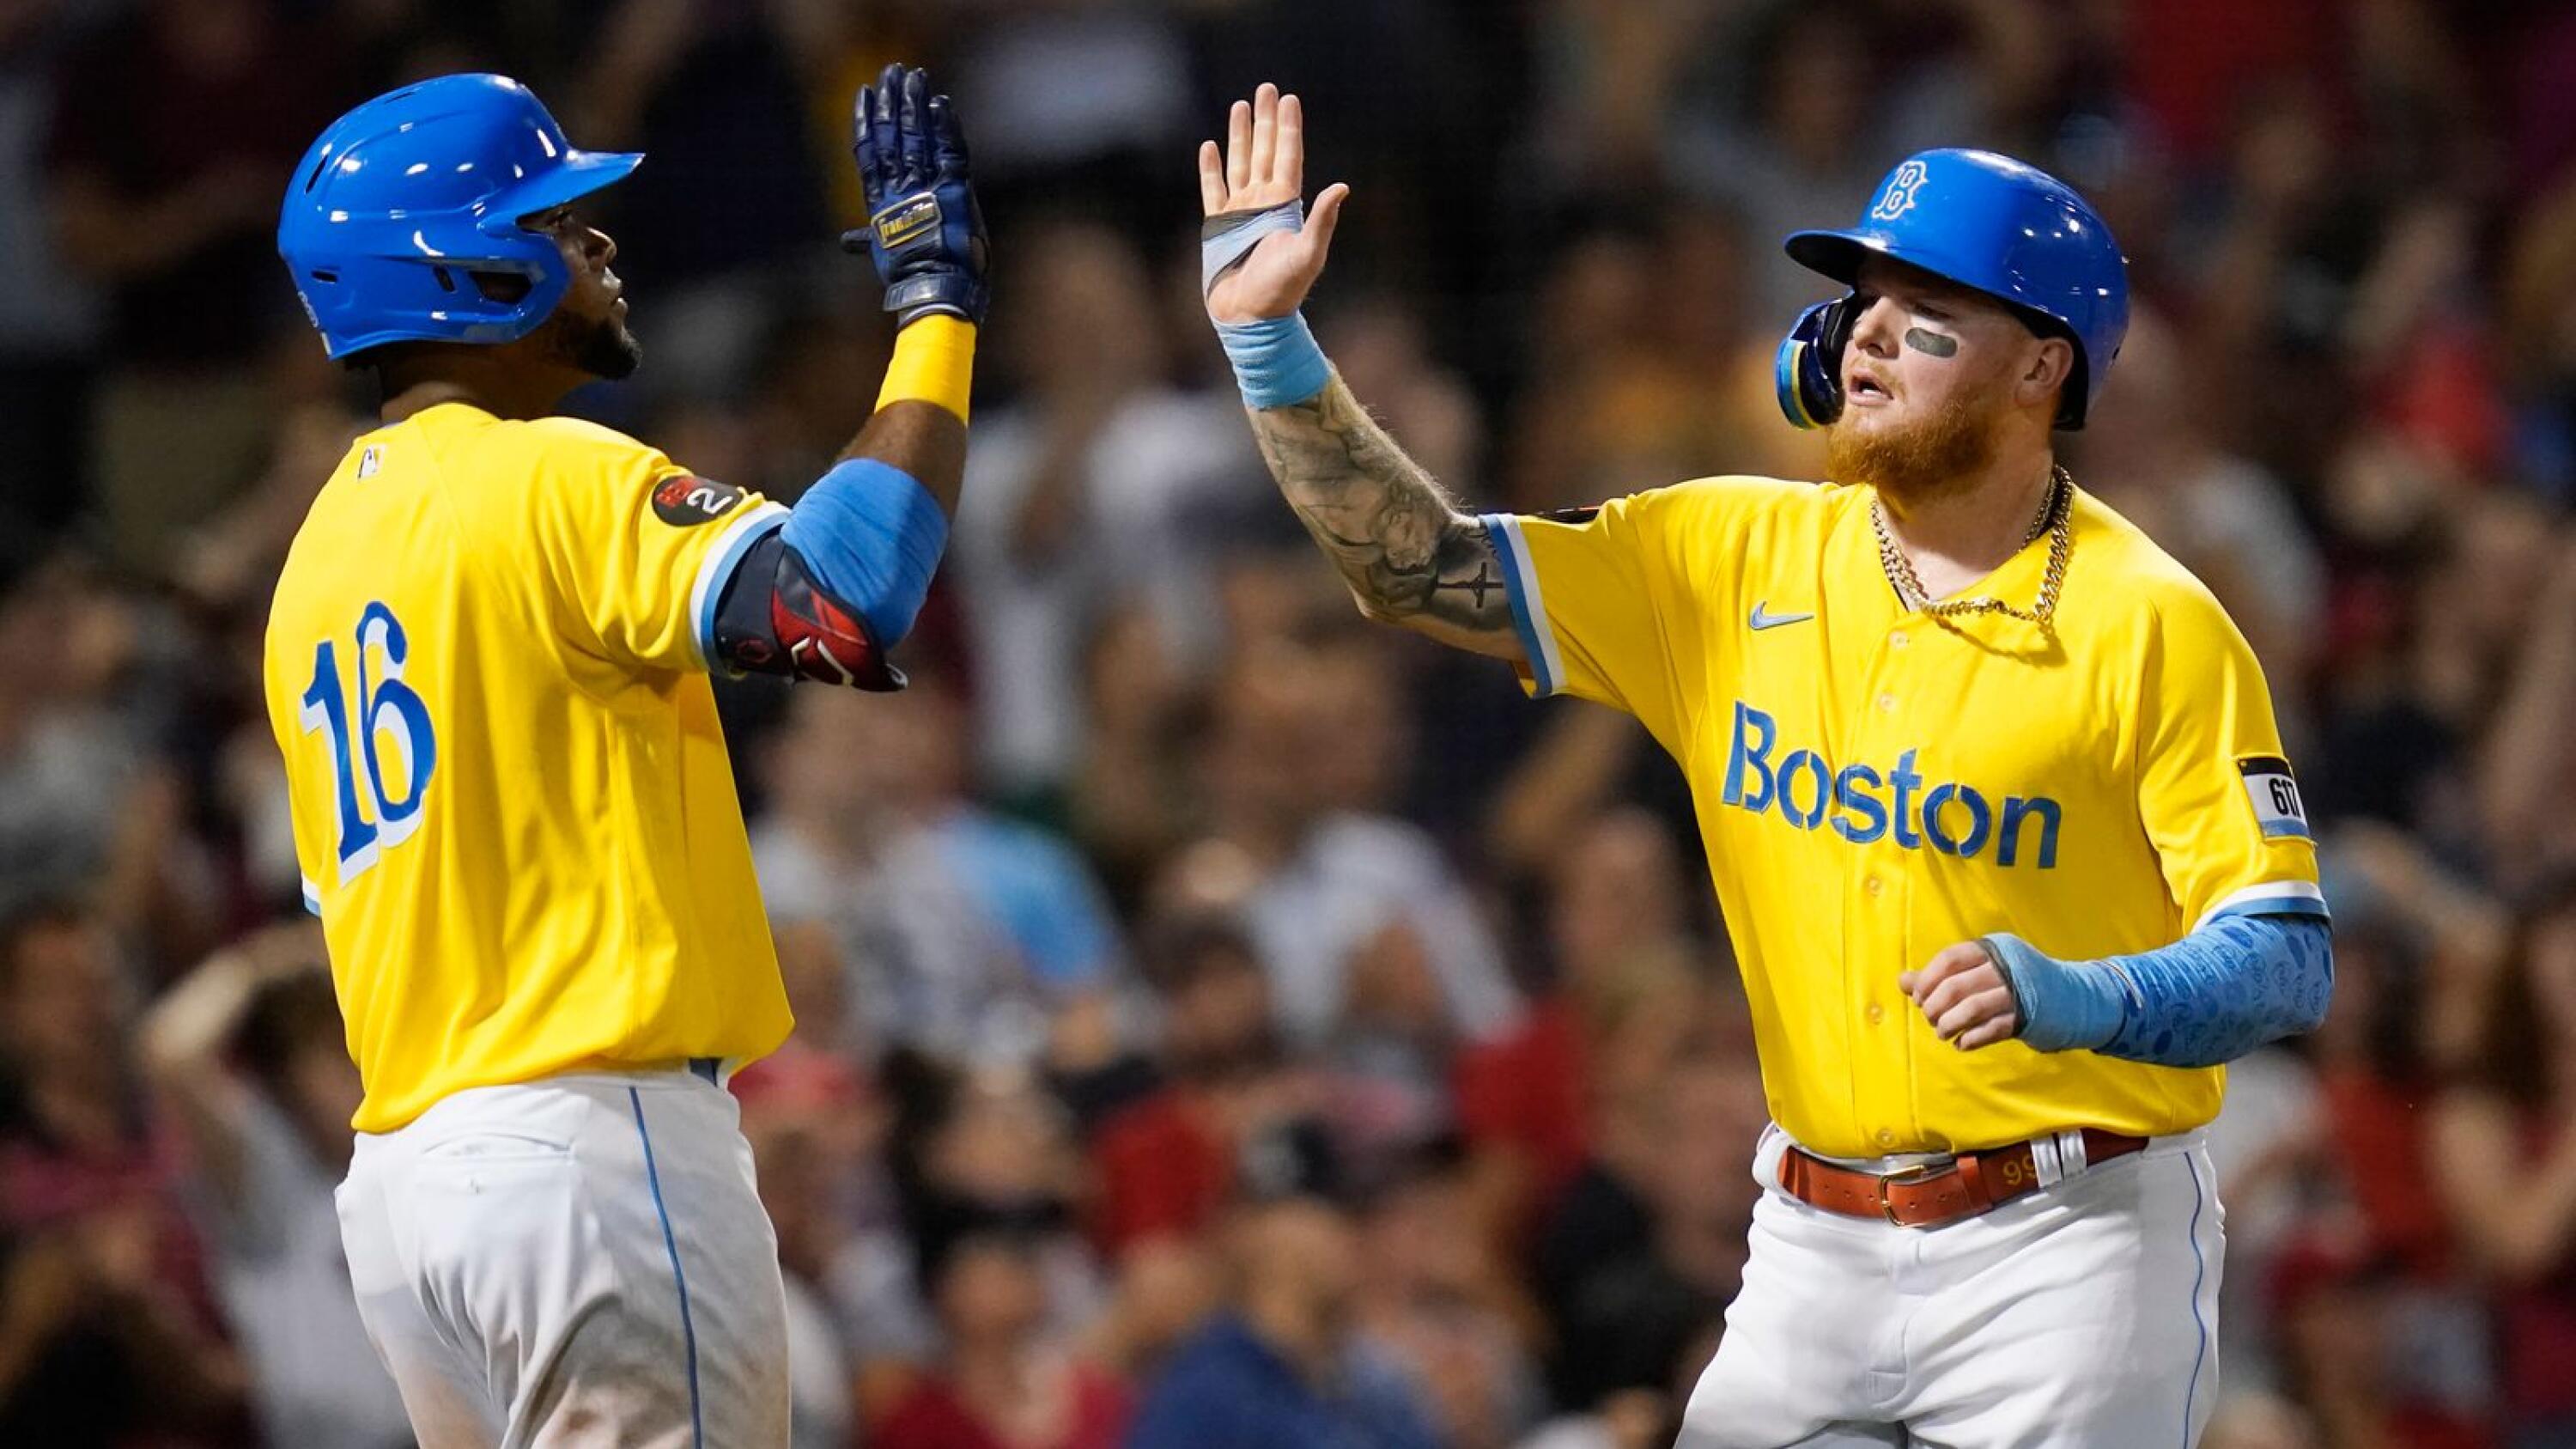 red sox blue yellow uniforms